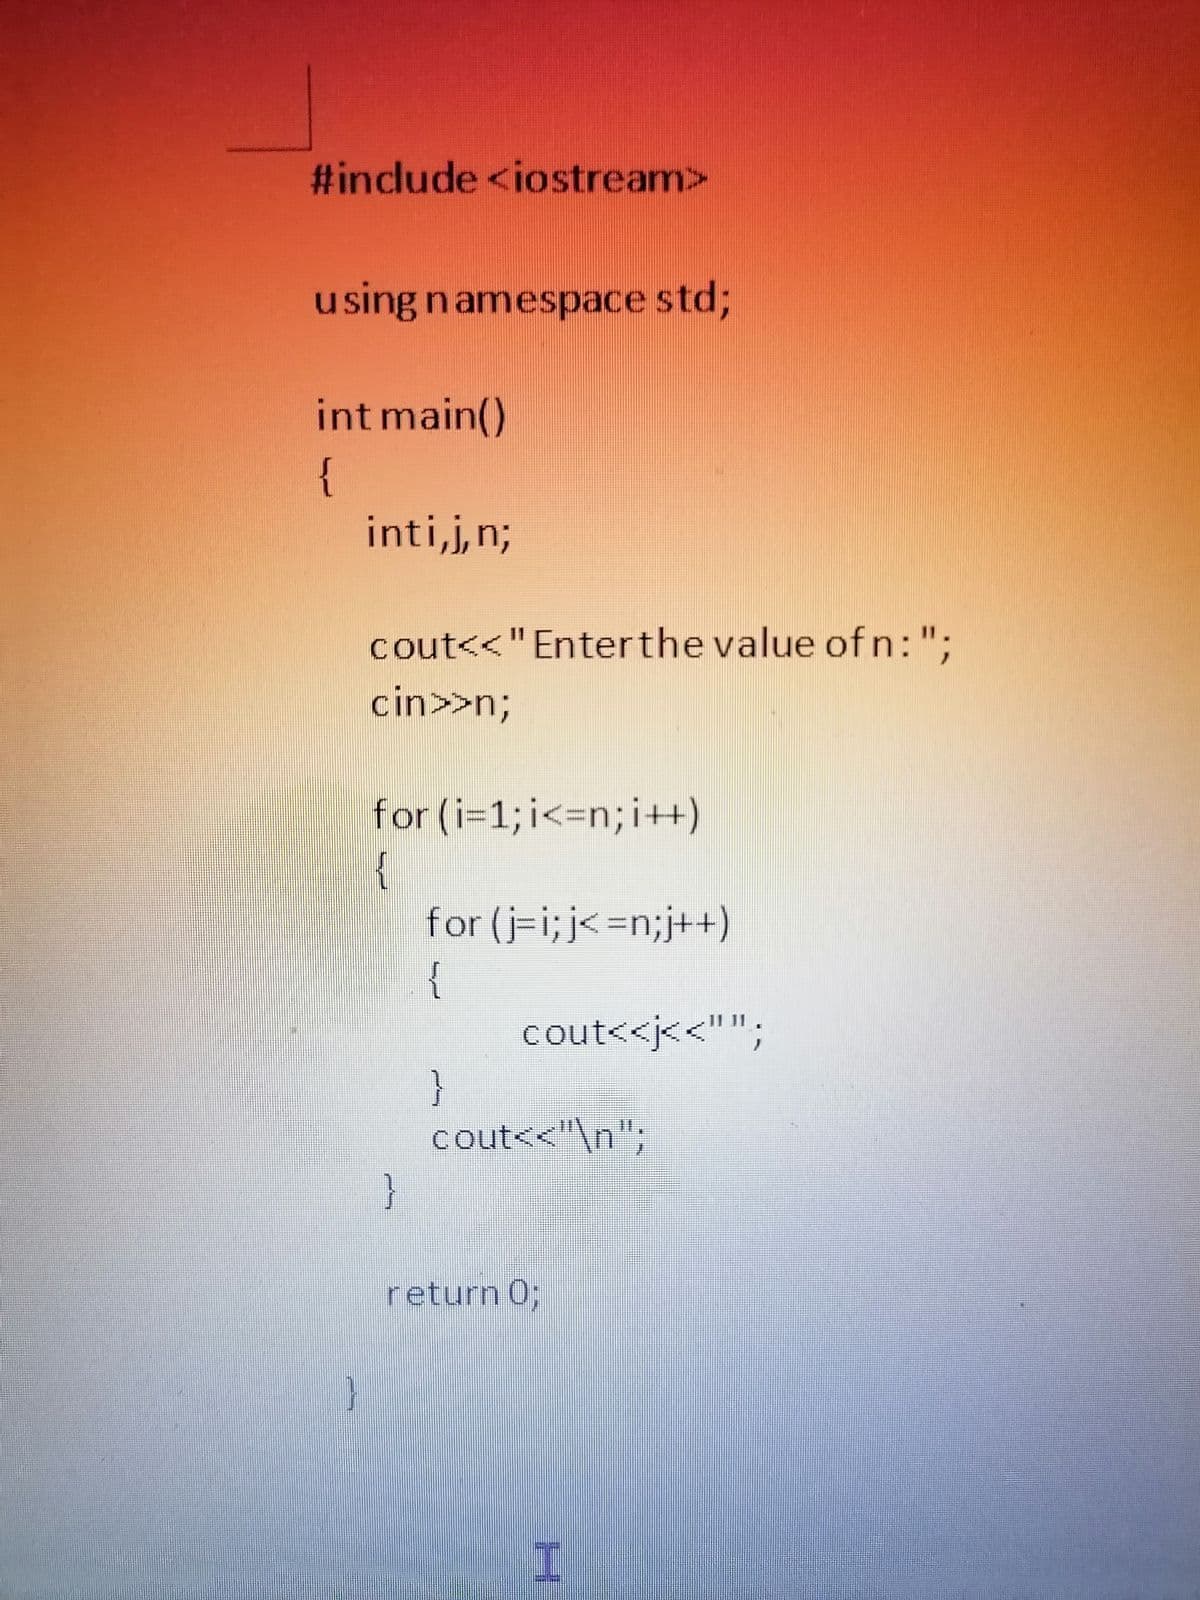 #include <iostream>
using namespace std3;
int main()
{
inti,j,n;
cout<<"Enterthe value of n:";
cin>>n3B
for (i=1; i<=n;i++)
{
for (j-i;j<=n;j++)
{
11 11
cout<<j<<"";
}
cout<<"\n";
}
return 0;
